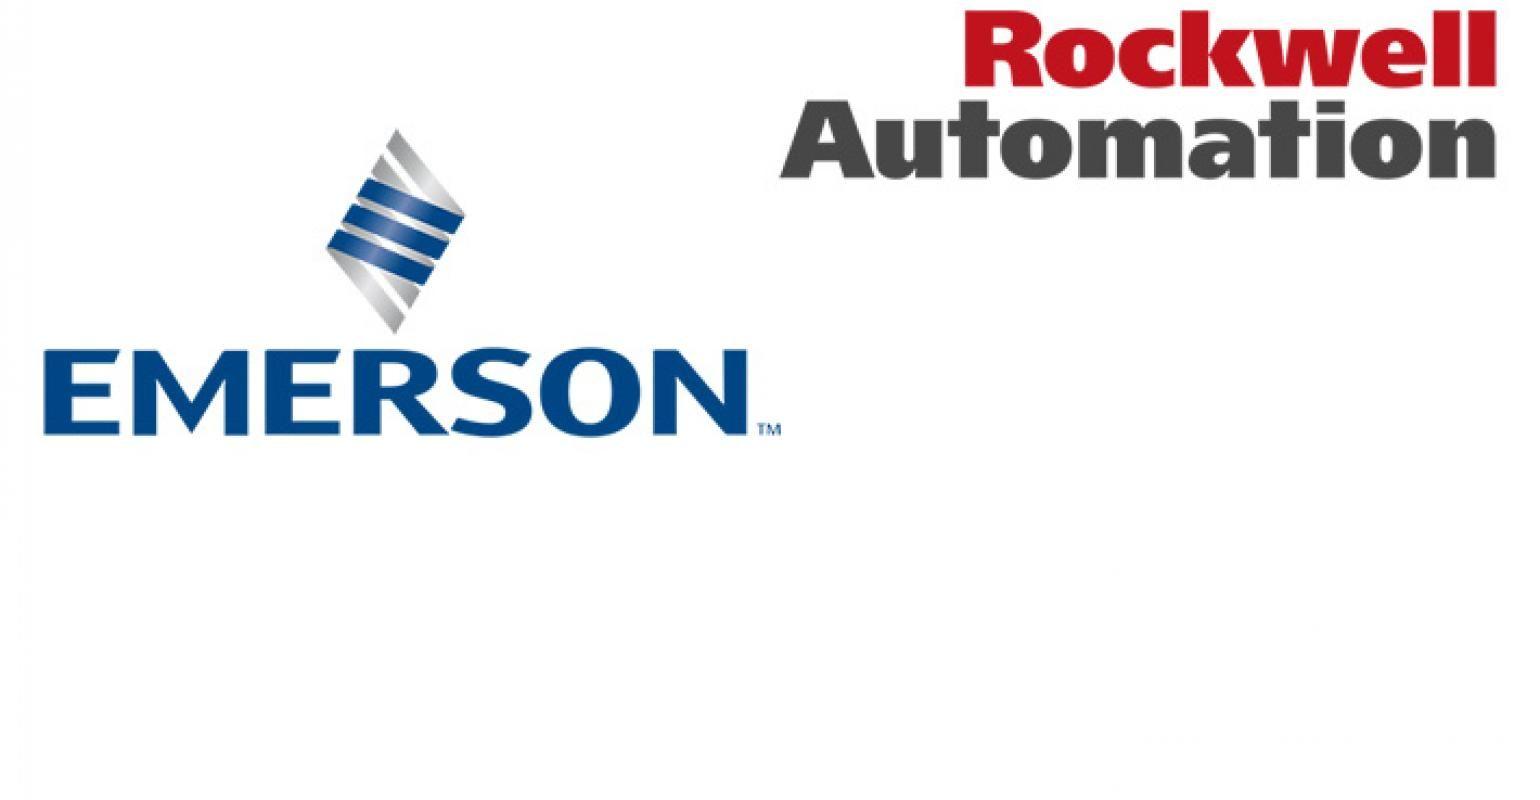 Emerson Logo - Emerson Withdraws $29 Billion Offer to Buy Rockwell Automation ...